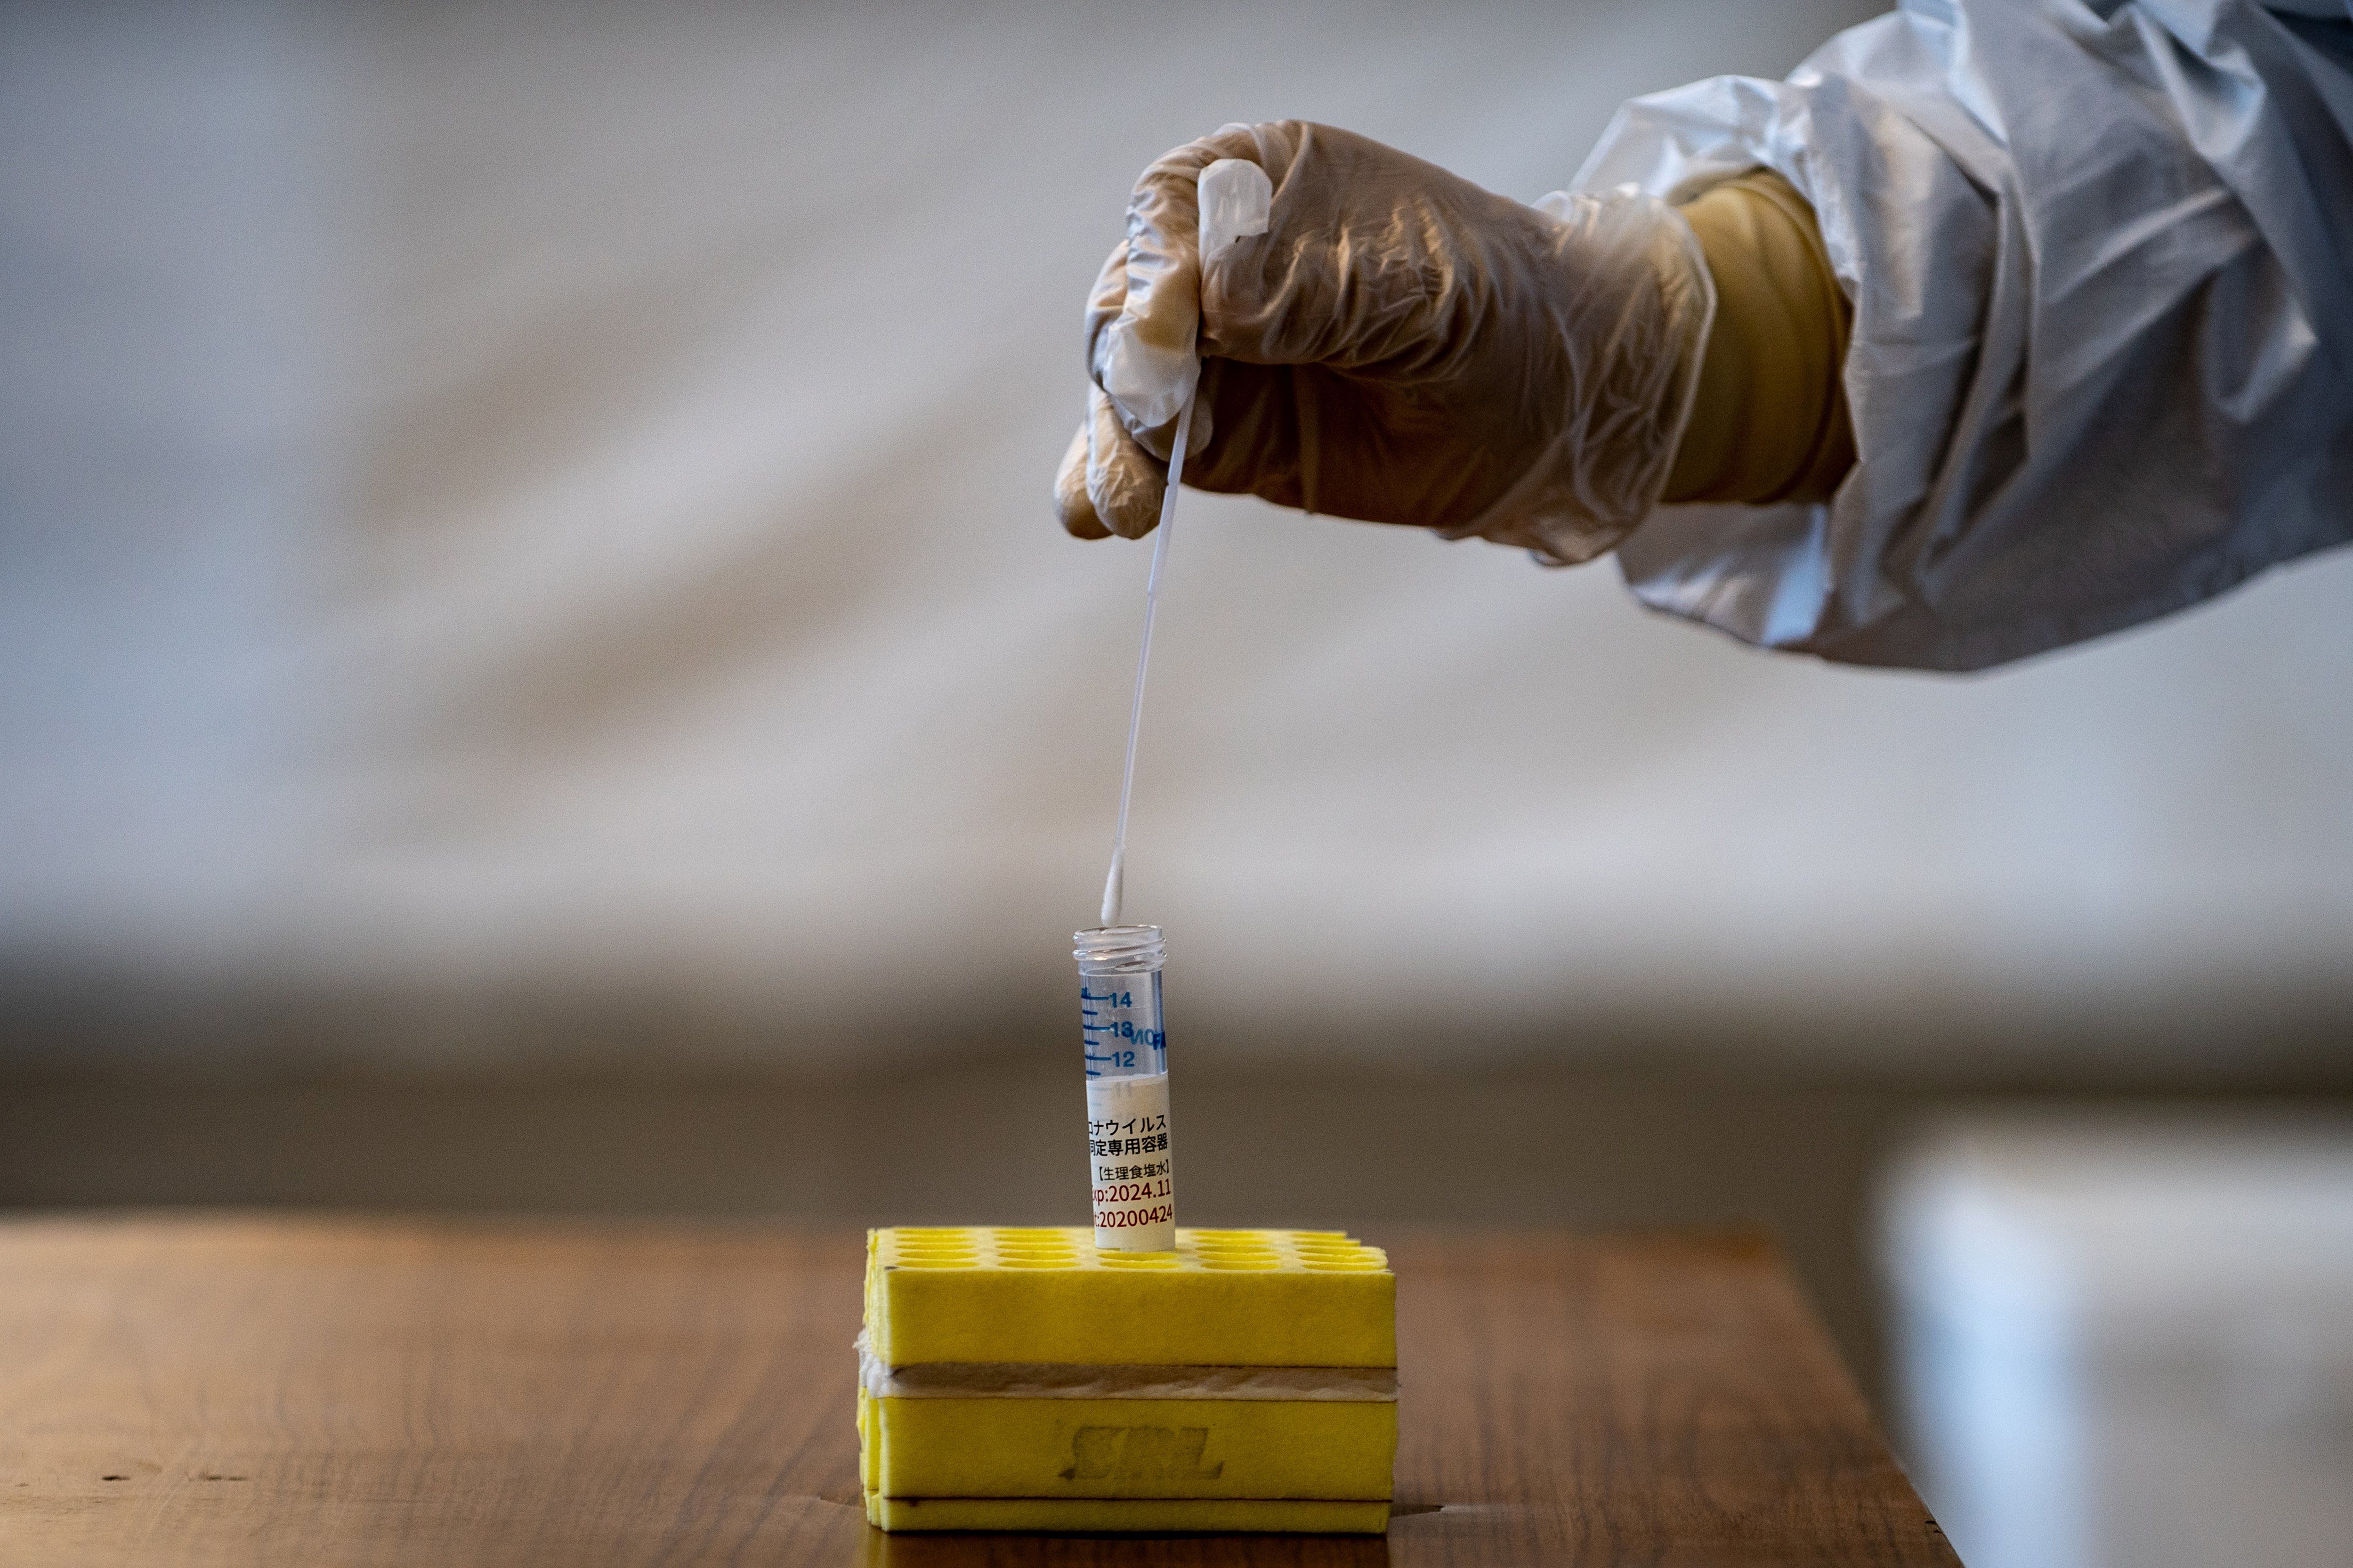 A medical staff member wearing protective clothing puts a swab into a container during demonstration of the Polymerase Chain Reaction (PCR) swab test for COVID-19 in Tokyo on May 8, 2020. Image by Philip Fong/AFP. Japan, 2020.